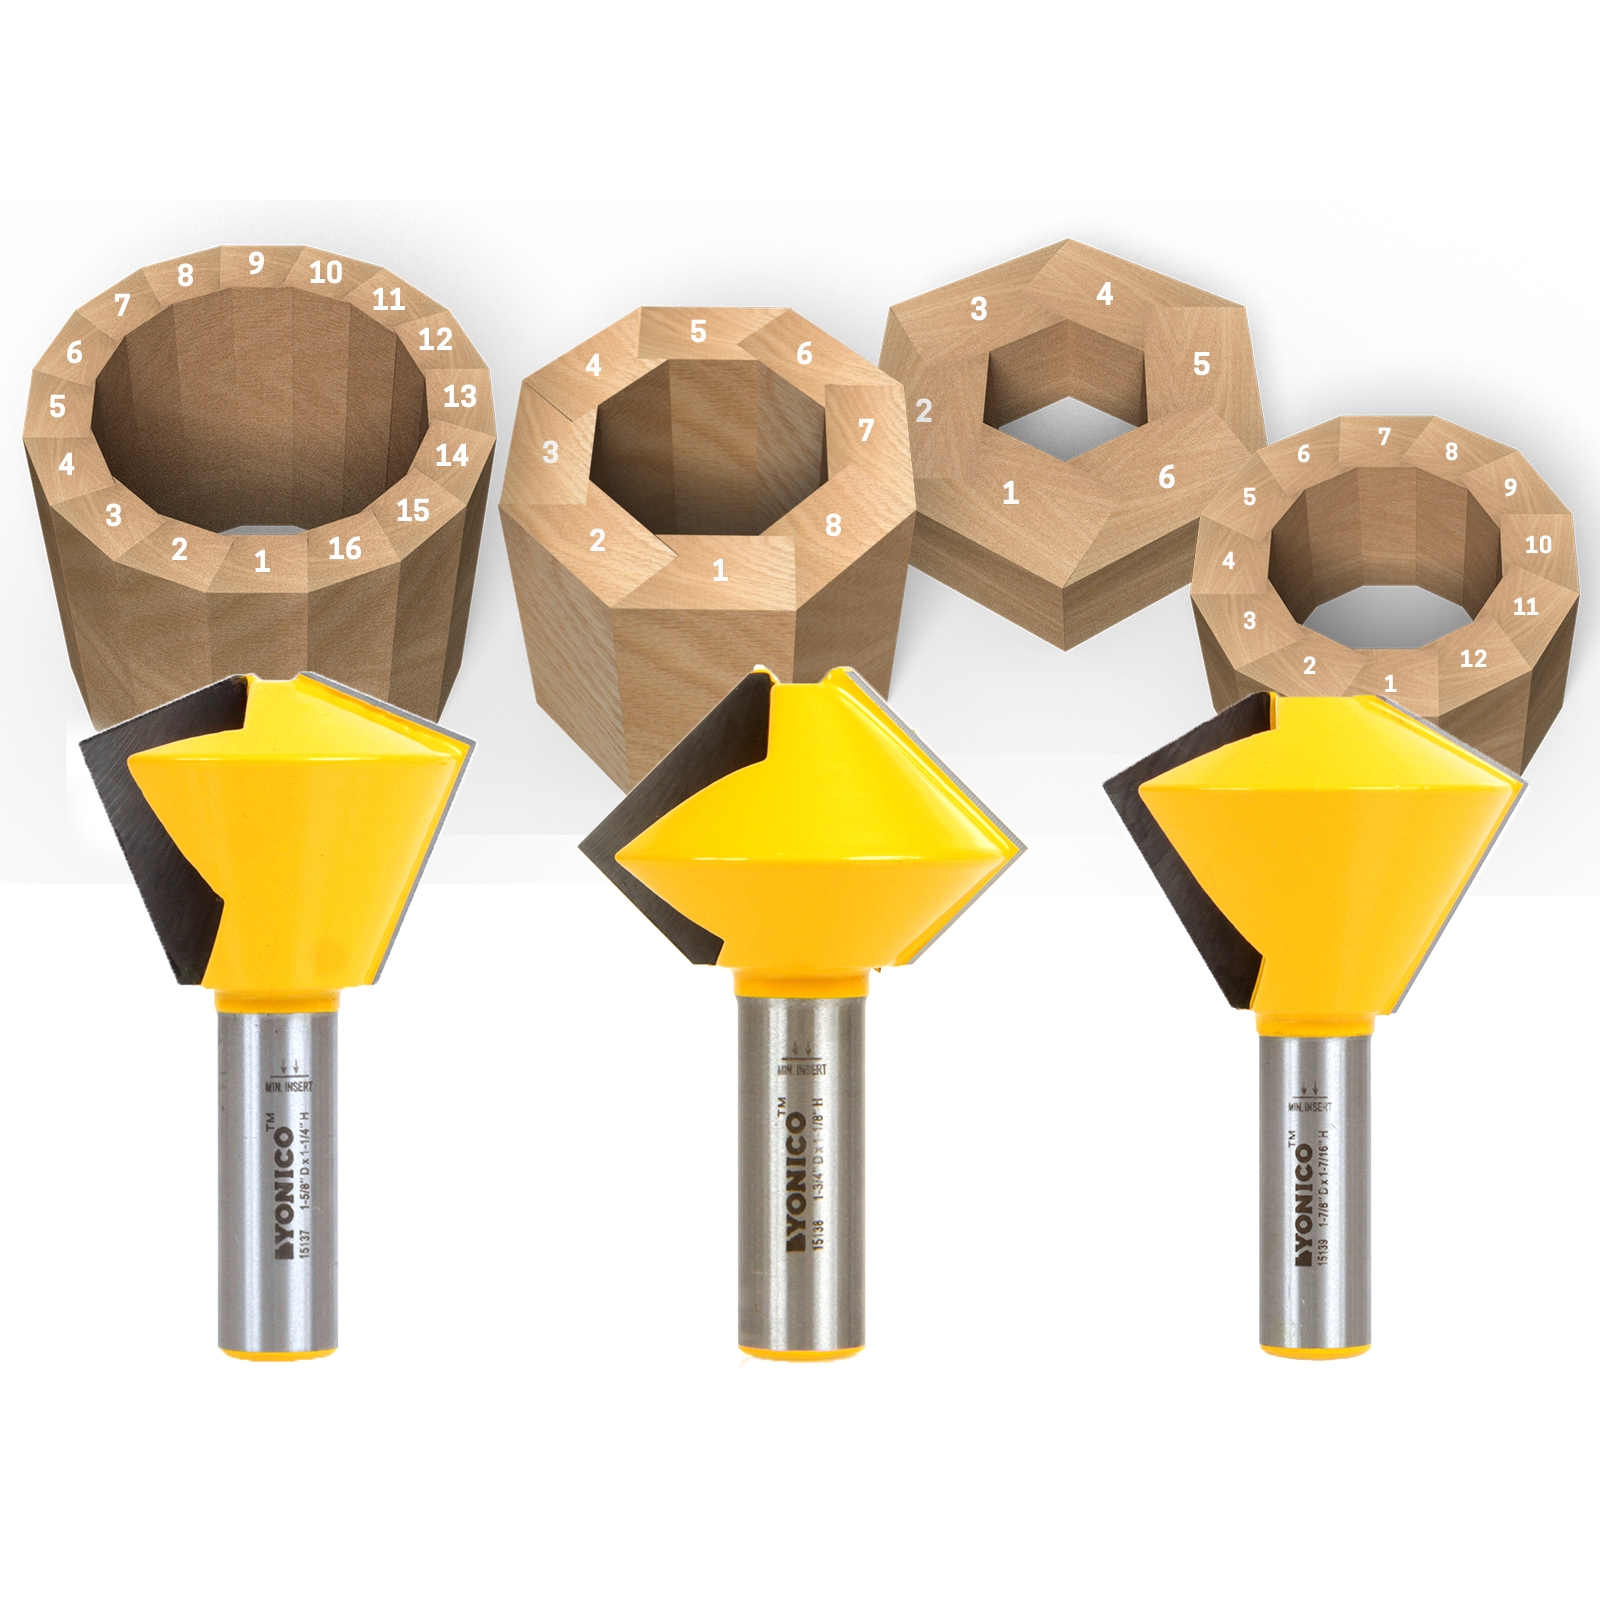 Fafeicy 3Pcs Bird's Mouth Glue Joint Router Bit Carbide Woodworking Milling Cutter for Solid Wood Hardwood Chipboard 1/2 Shank 